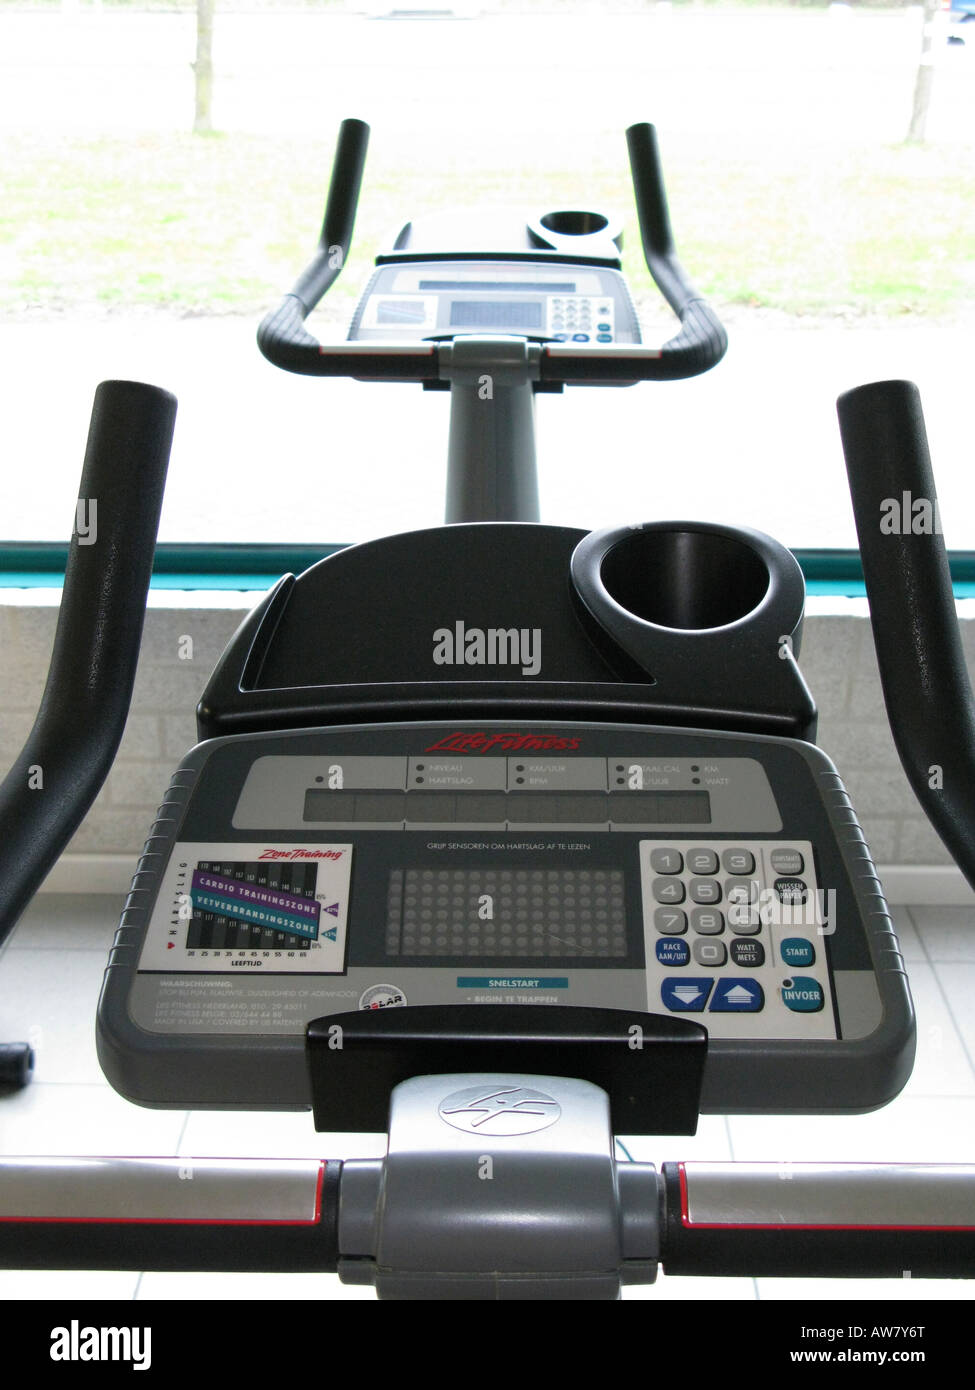 controls and dials on running machine in fitness club Stock Photo